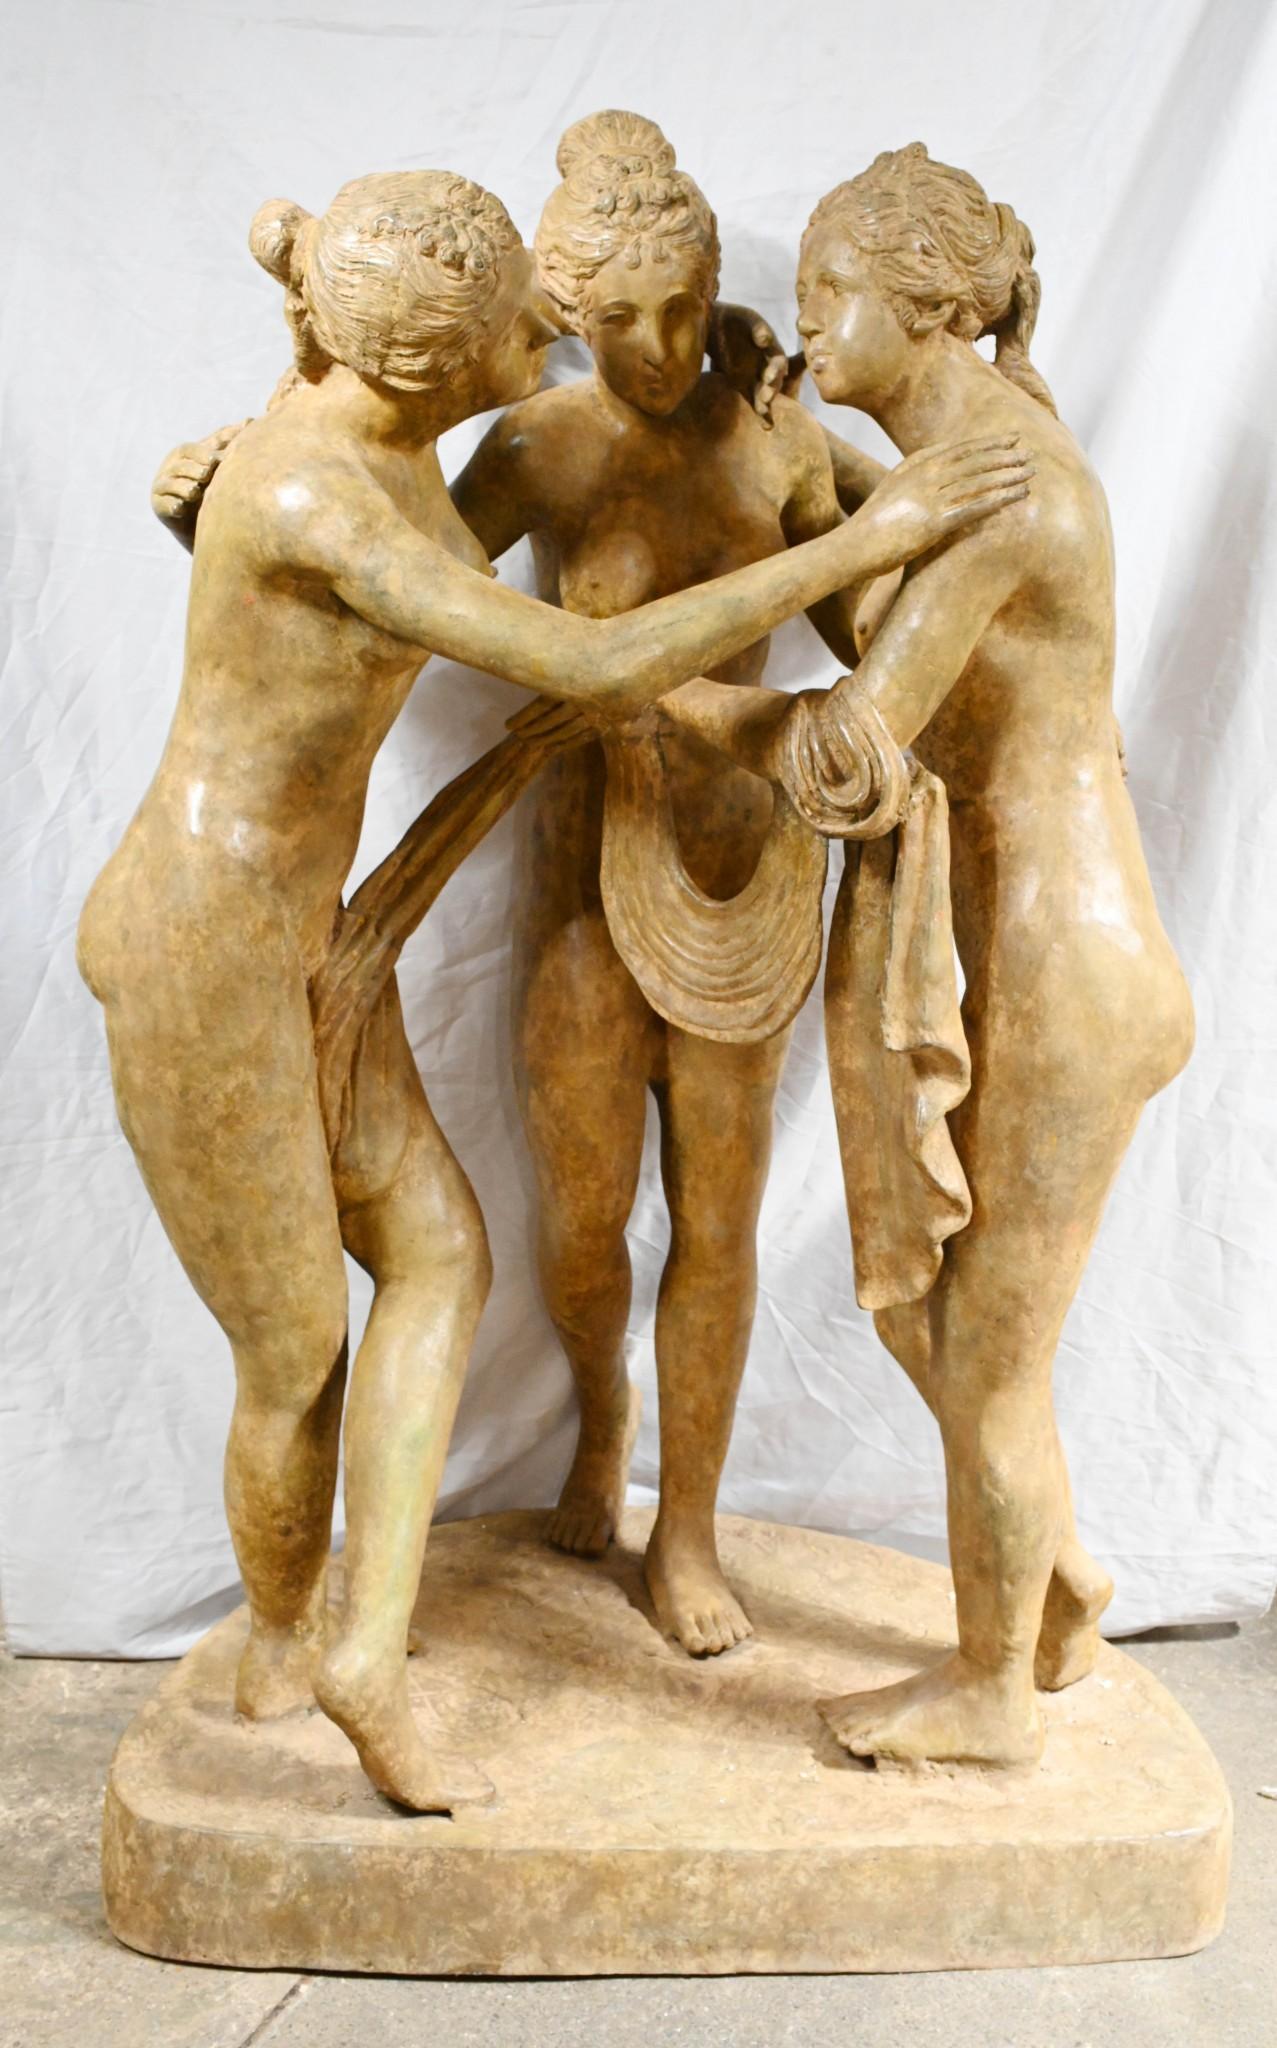 - Stunning bronze statue of the famous Three Graces from Greek and Roman mythology
- Lifesize piece at over five feet tall
- Each of the three figurines represents charm, beauty and creativity
- I love the verdis gris patina to the bronze
- The